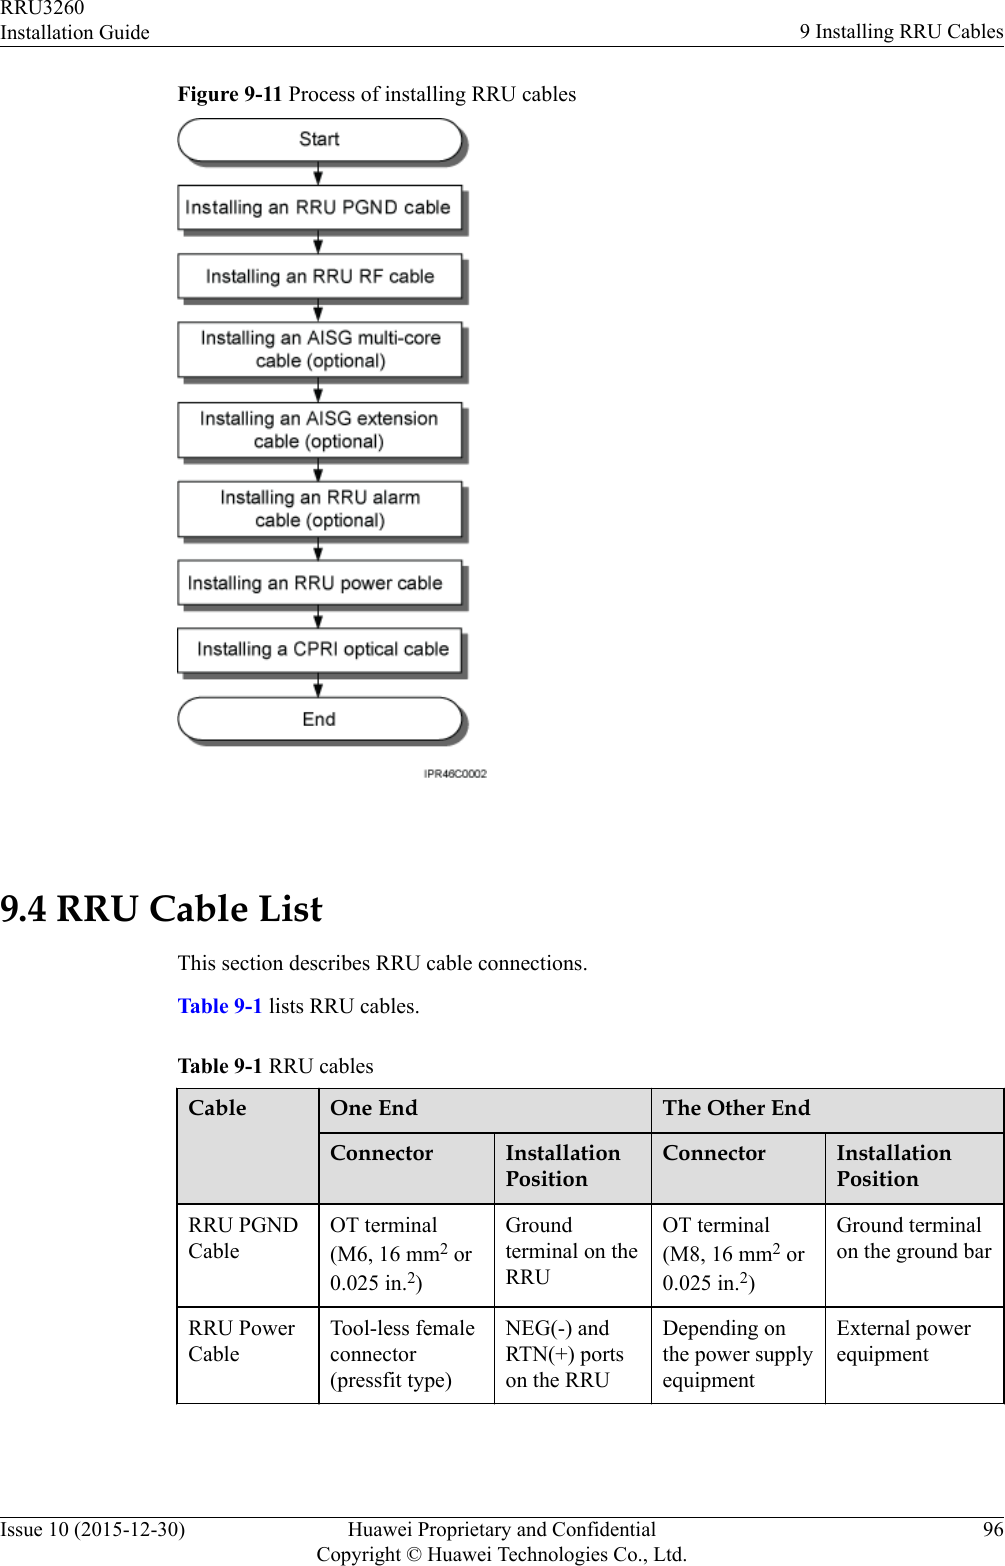 Figure 9-11 Process of installing RRU cables 9.4 RRU Cable ListThis section describes RRU cable connections.Table 9-1 lists RRU cables.Table 9-1 RRU cablesCable One End The Other EndConnector InstallationPositionConnector InstallationPositionRRU PGNDCableOT terminal(M6, 16 mm2 or0.025 in.2)Groundterminal on theRRUOT terminal(M8, 16 mm2 or0.025 in.2)Ground terminalon the ground barRRU PowerCableTool-less femaleconnector(pressfit type)NEG(-) andRTN(+) portson the RRUDepending onthe power supplyequipmentExternal powerequipmentRRU3260Installation Guide 9 Installing RRU CablesIssue 10 (2015-12-30) Huawei Proprietary and ConfidentialCopyright © Huawei Technologies Co., Ltd.96